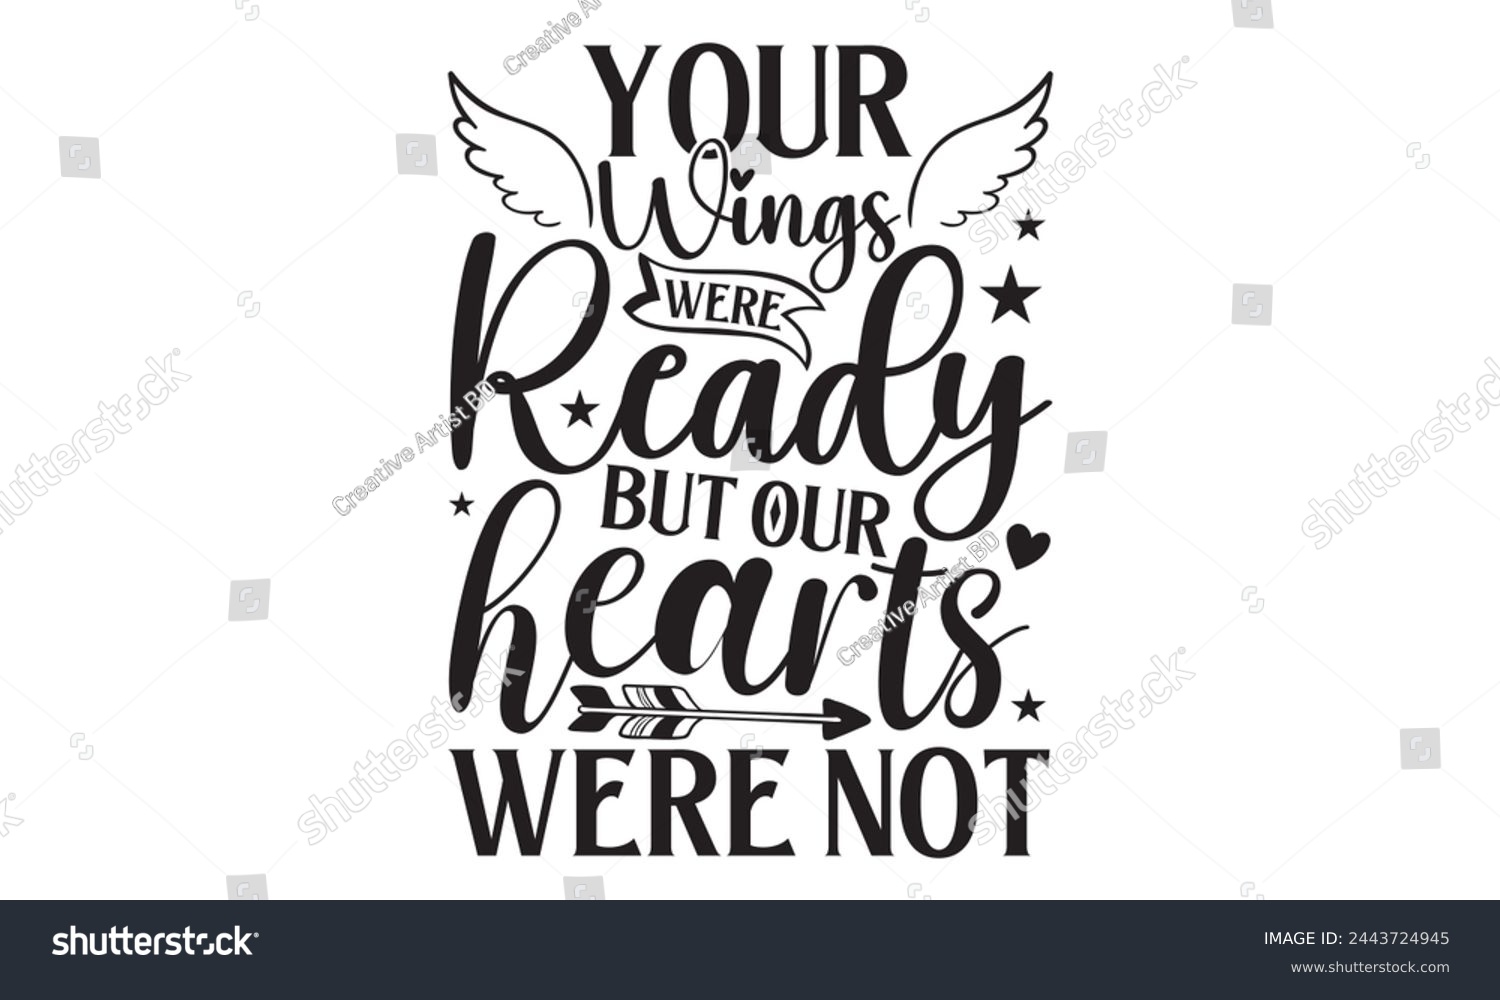 SVG of Your Wings Were Ready But Our Hearts Were Not - Memorial T shirt Design, Handmade calligraphy vector illustration, Cutting and Silhouette, for prints on bags, cups, card, posters. svg